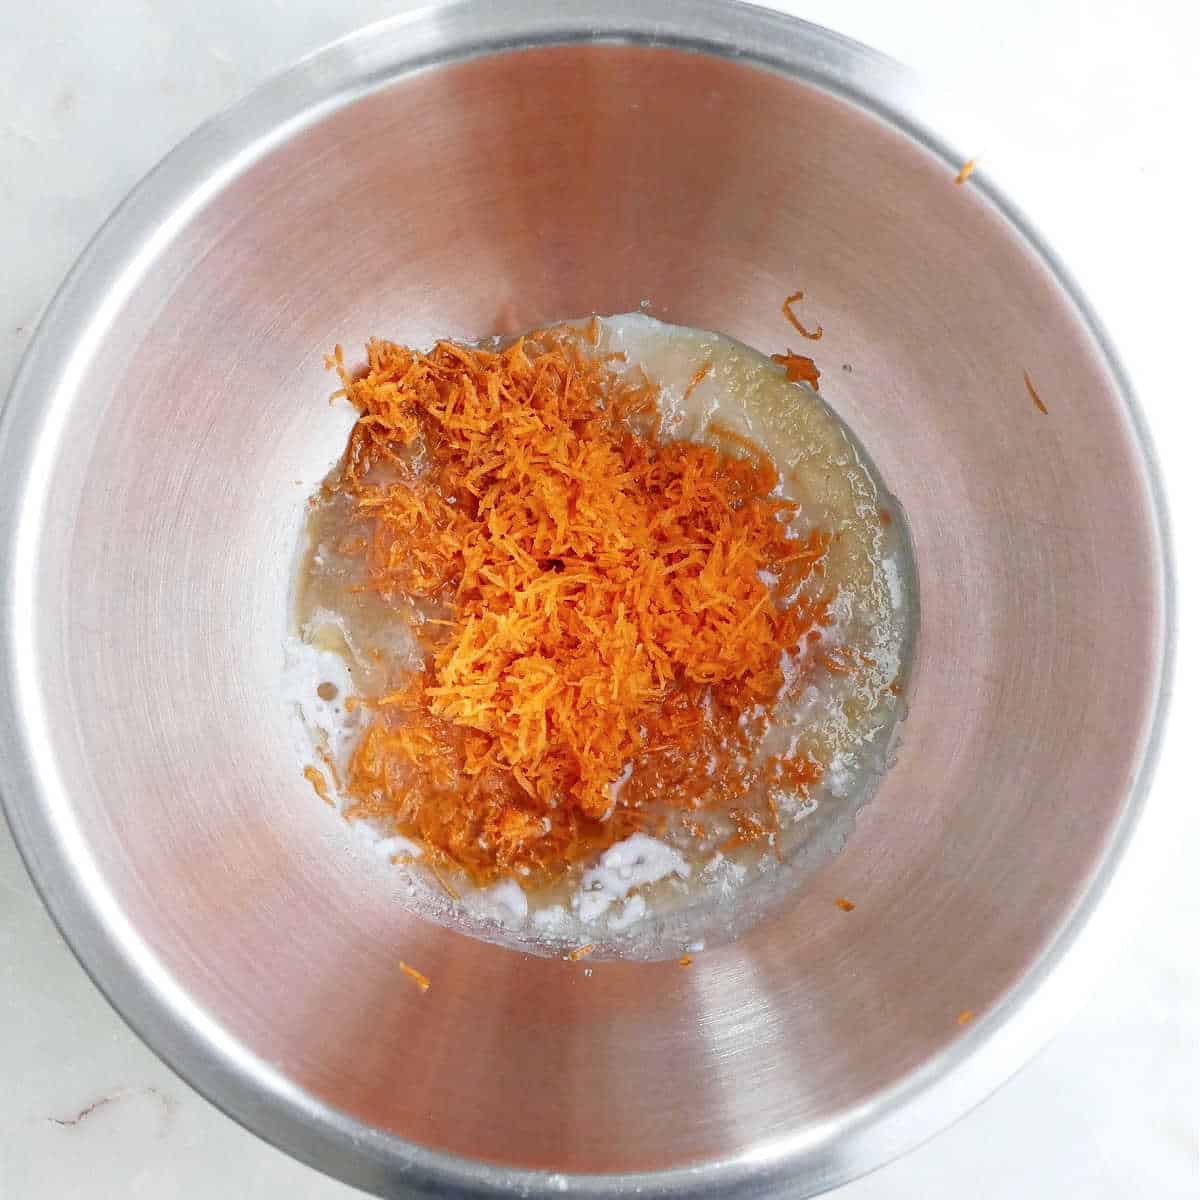 wet ingredients and carrots for cookies in a mixing bowl